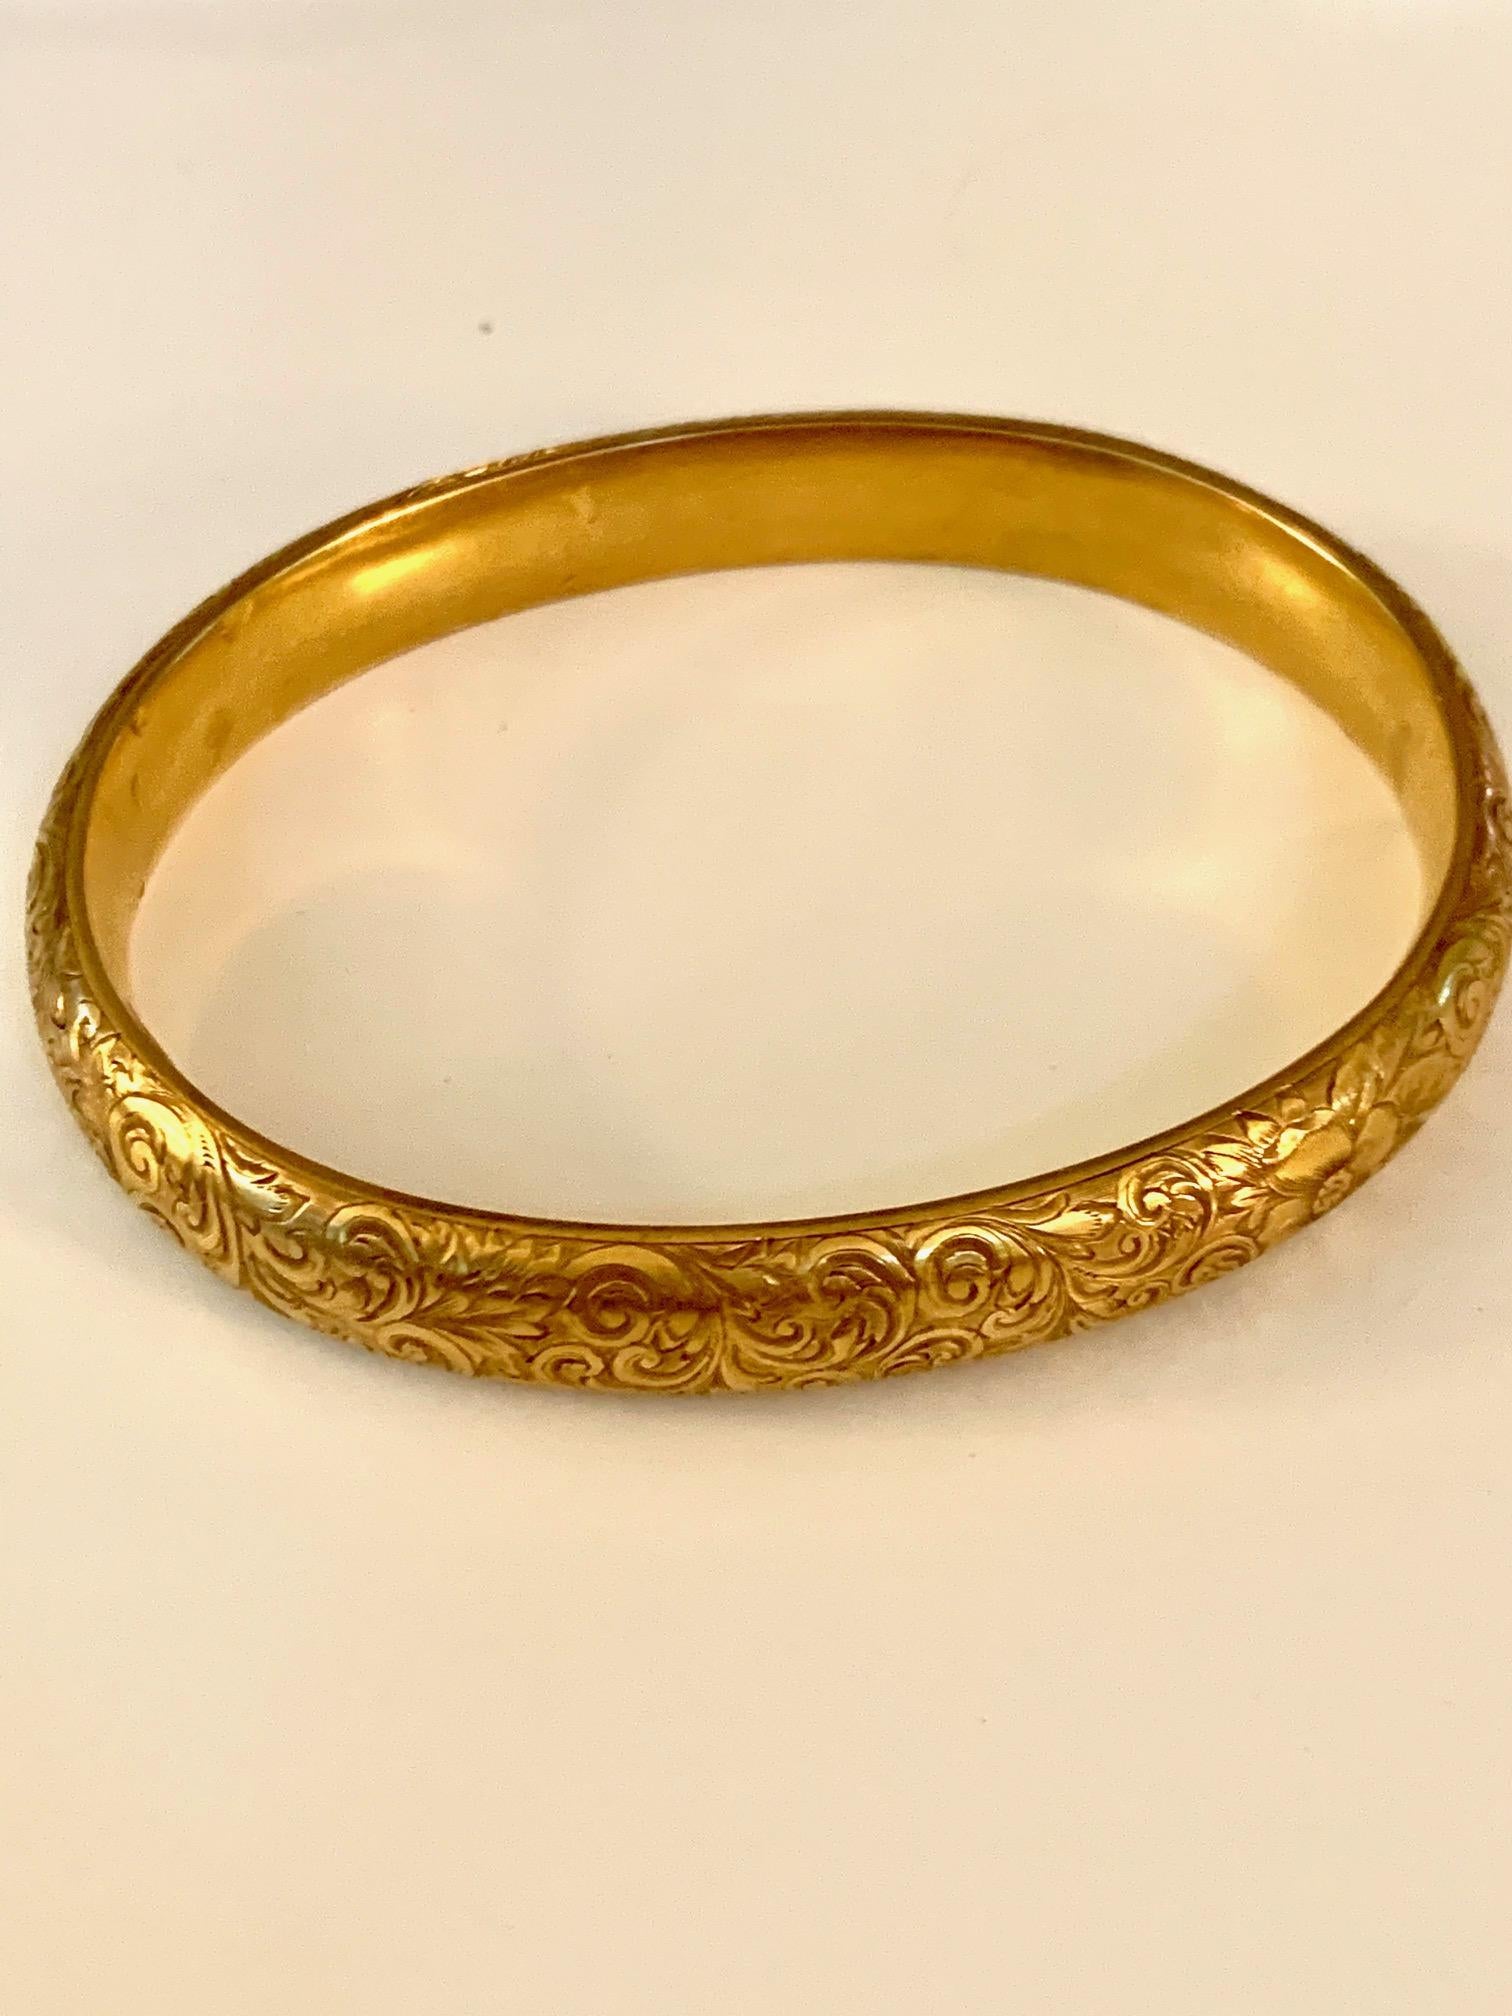 This beautiful Art Nouveau Riker Brother 14 kart yellow Gold bangle has amazing floral foliate design engraving throughout the entire bangle.  This piece is stamped 14k with a Riker hallmark. 
Measurement:
The outside circumfernce is 8 3/4